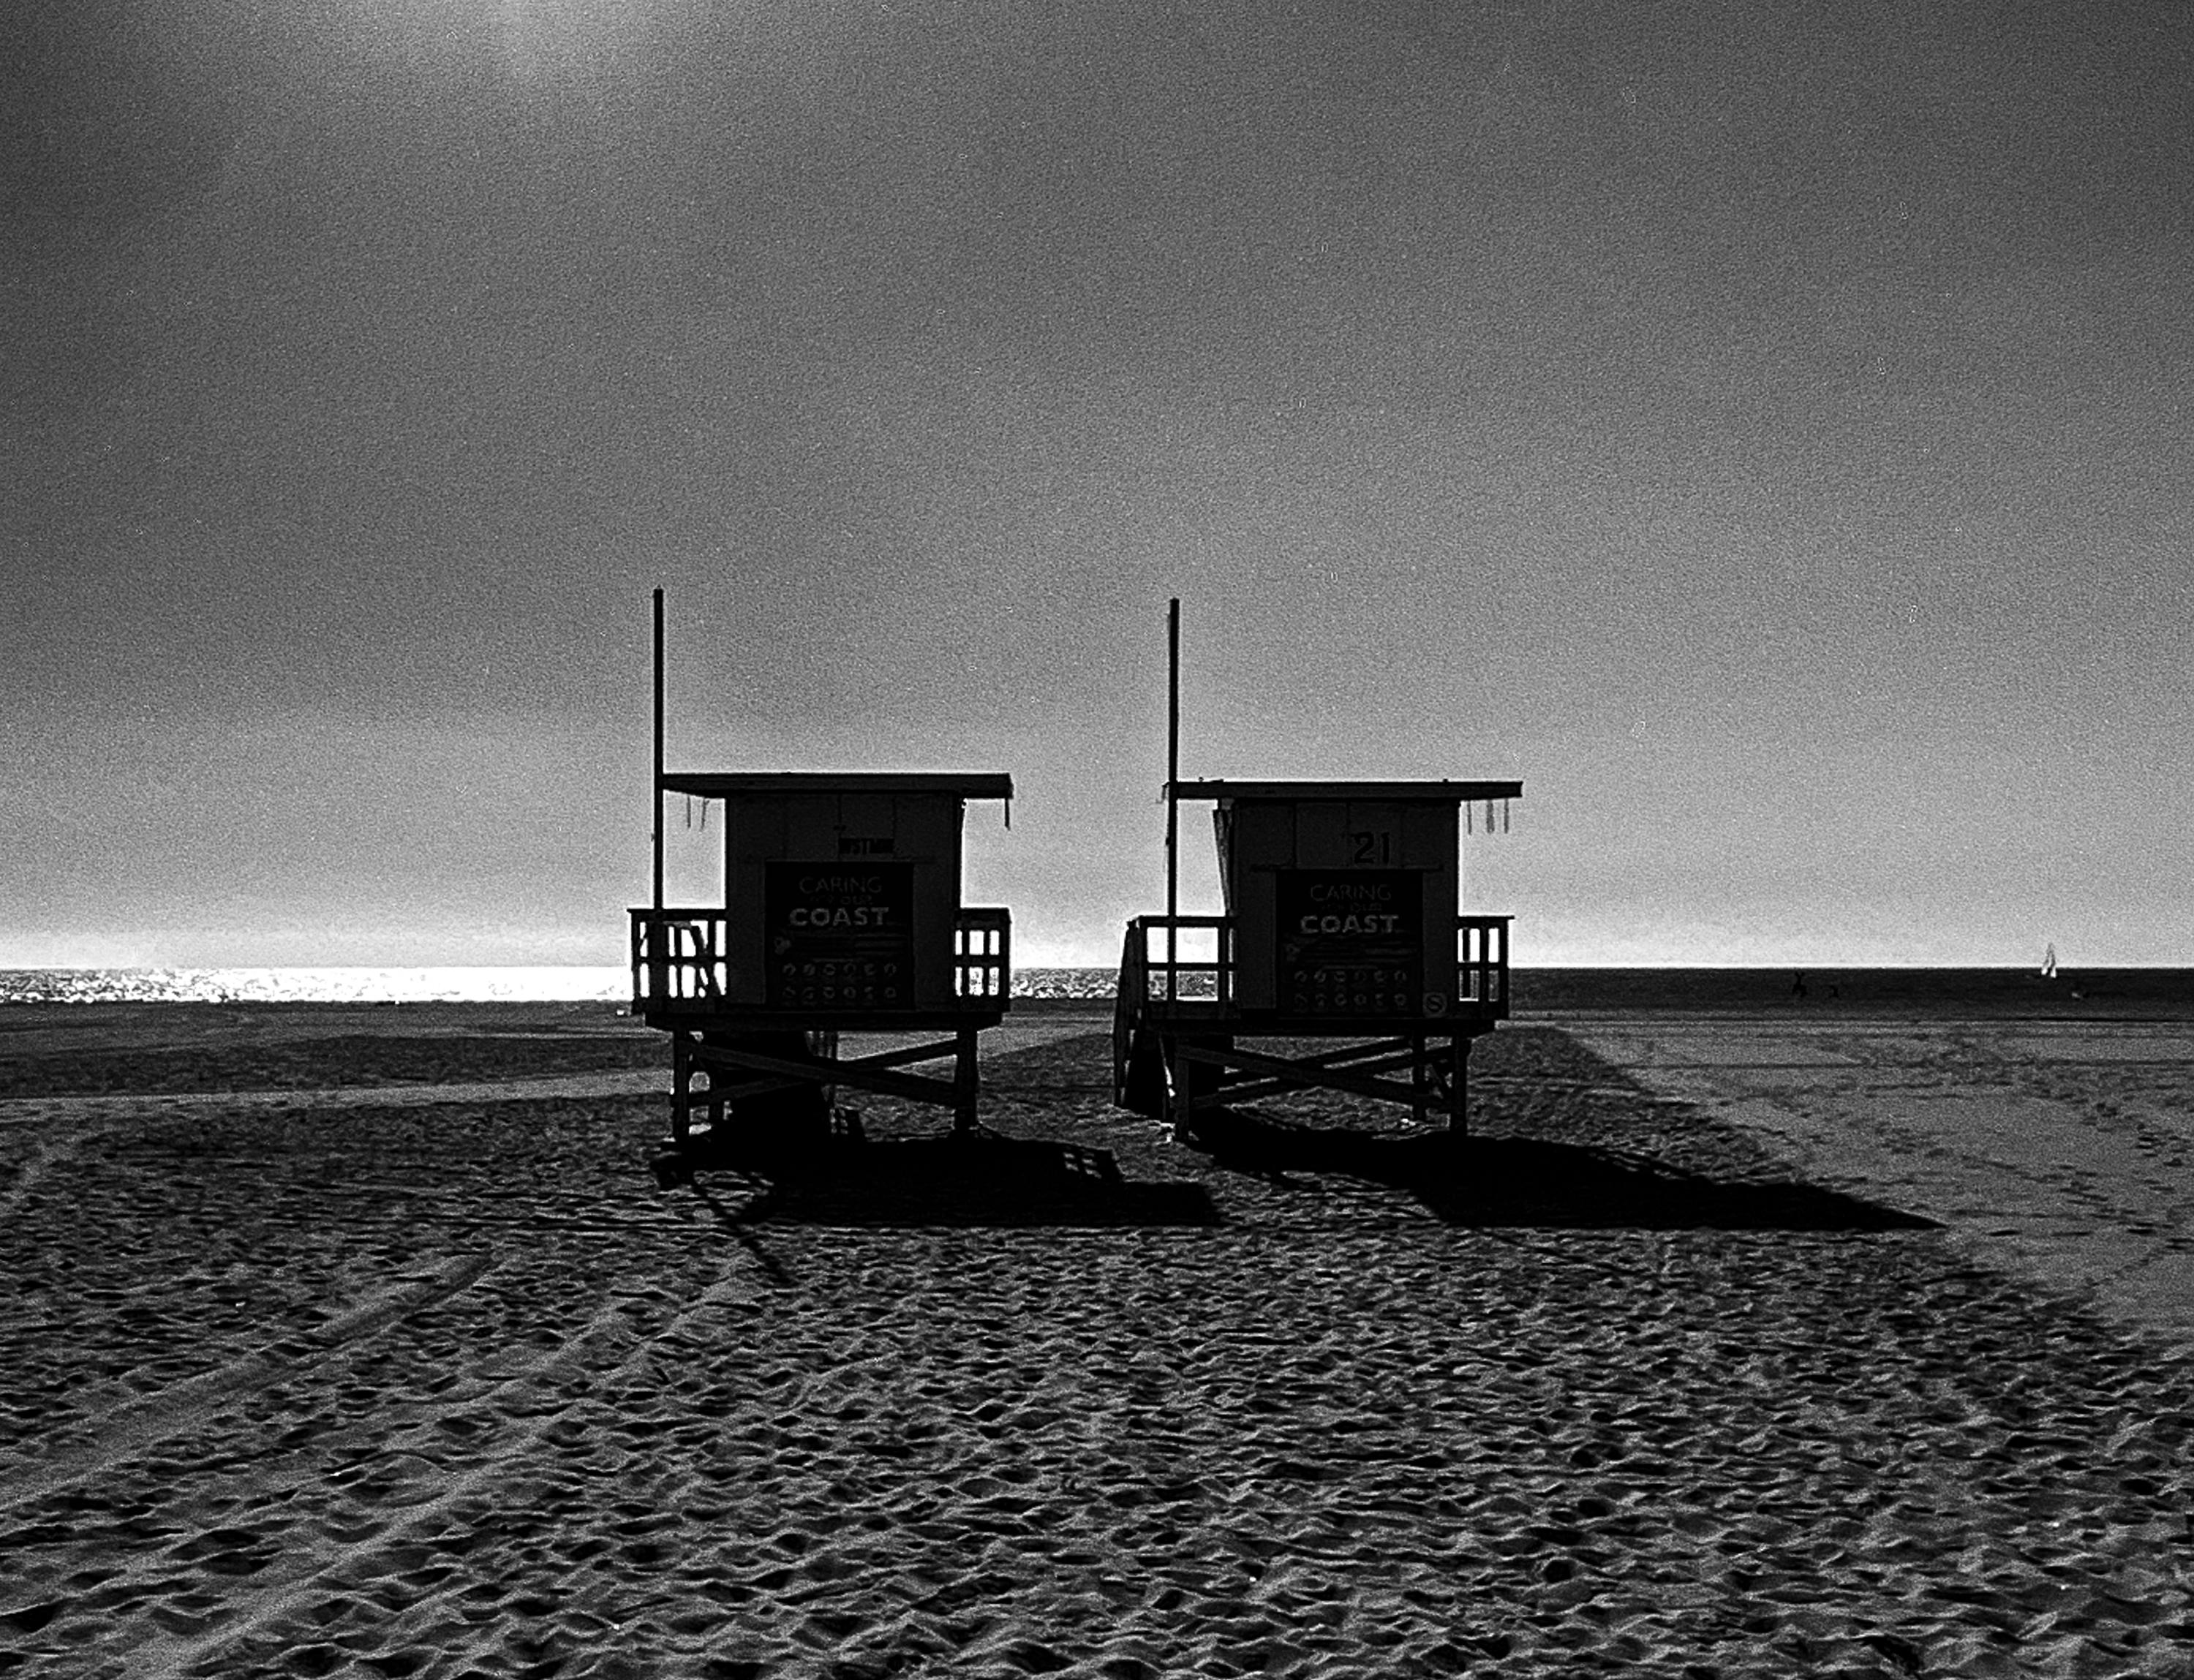 Black and white ocean beach landscape with two lifeguard towers.

Original gallery quality archival pigment print on archival paper signed by the artist.
Limited edition of 6
Paper size: 24